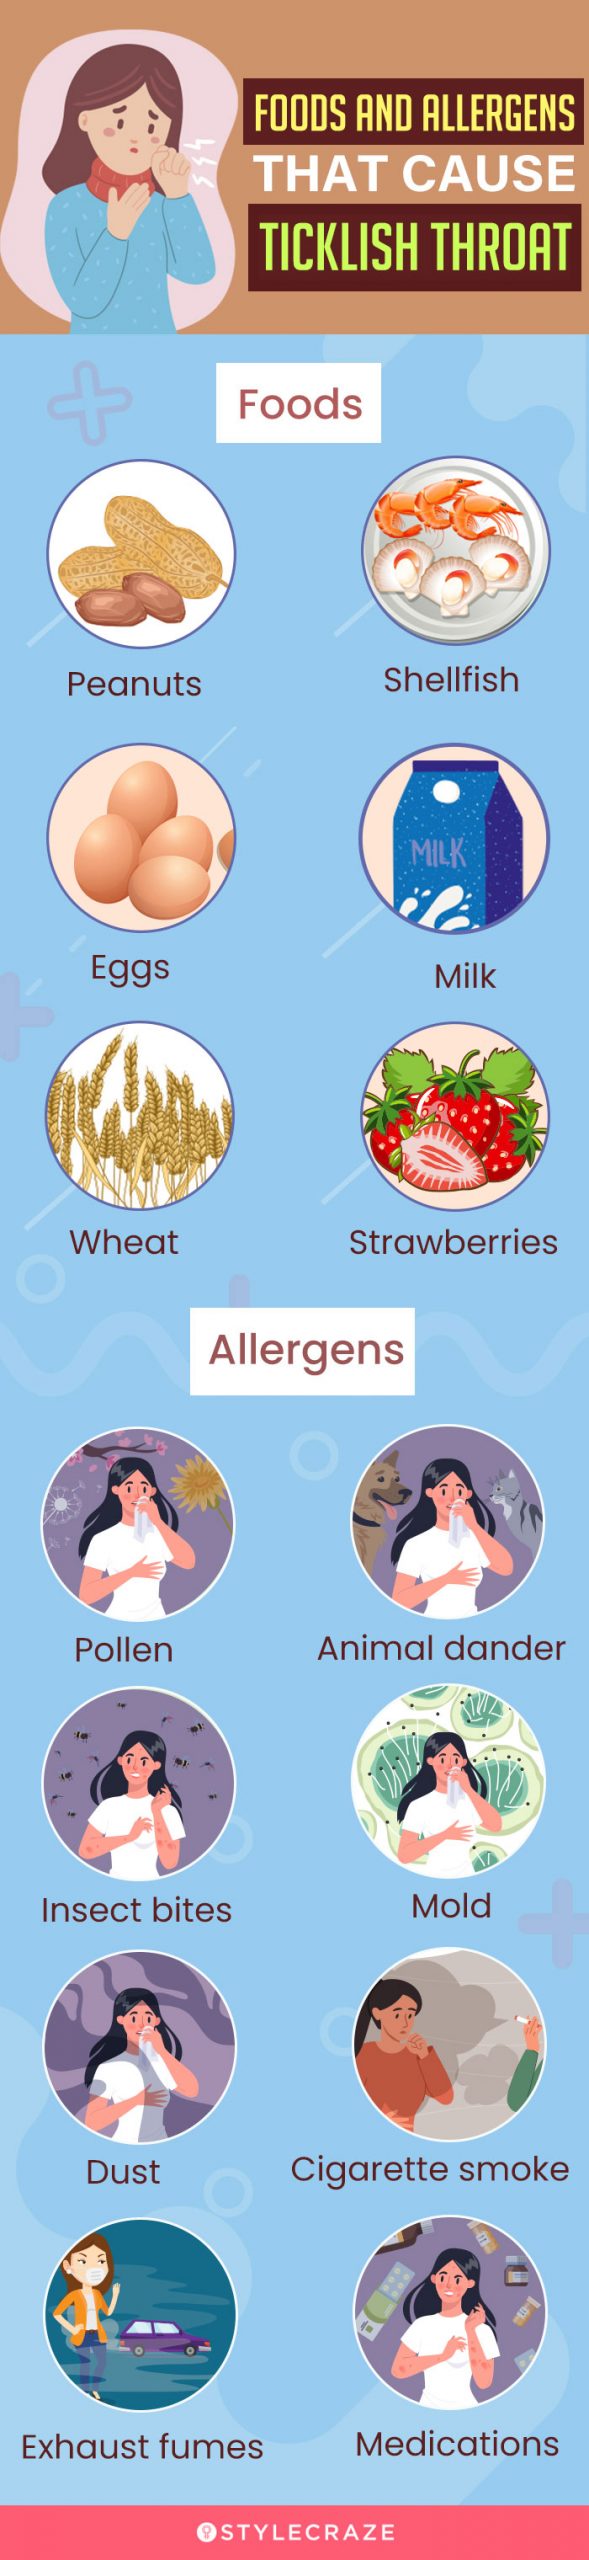 foods and allergens that cause ticklish throat (infographic)